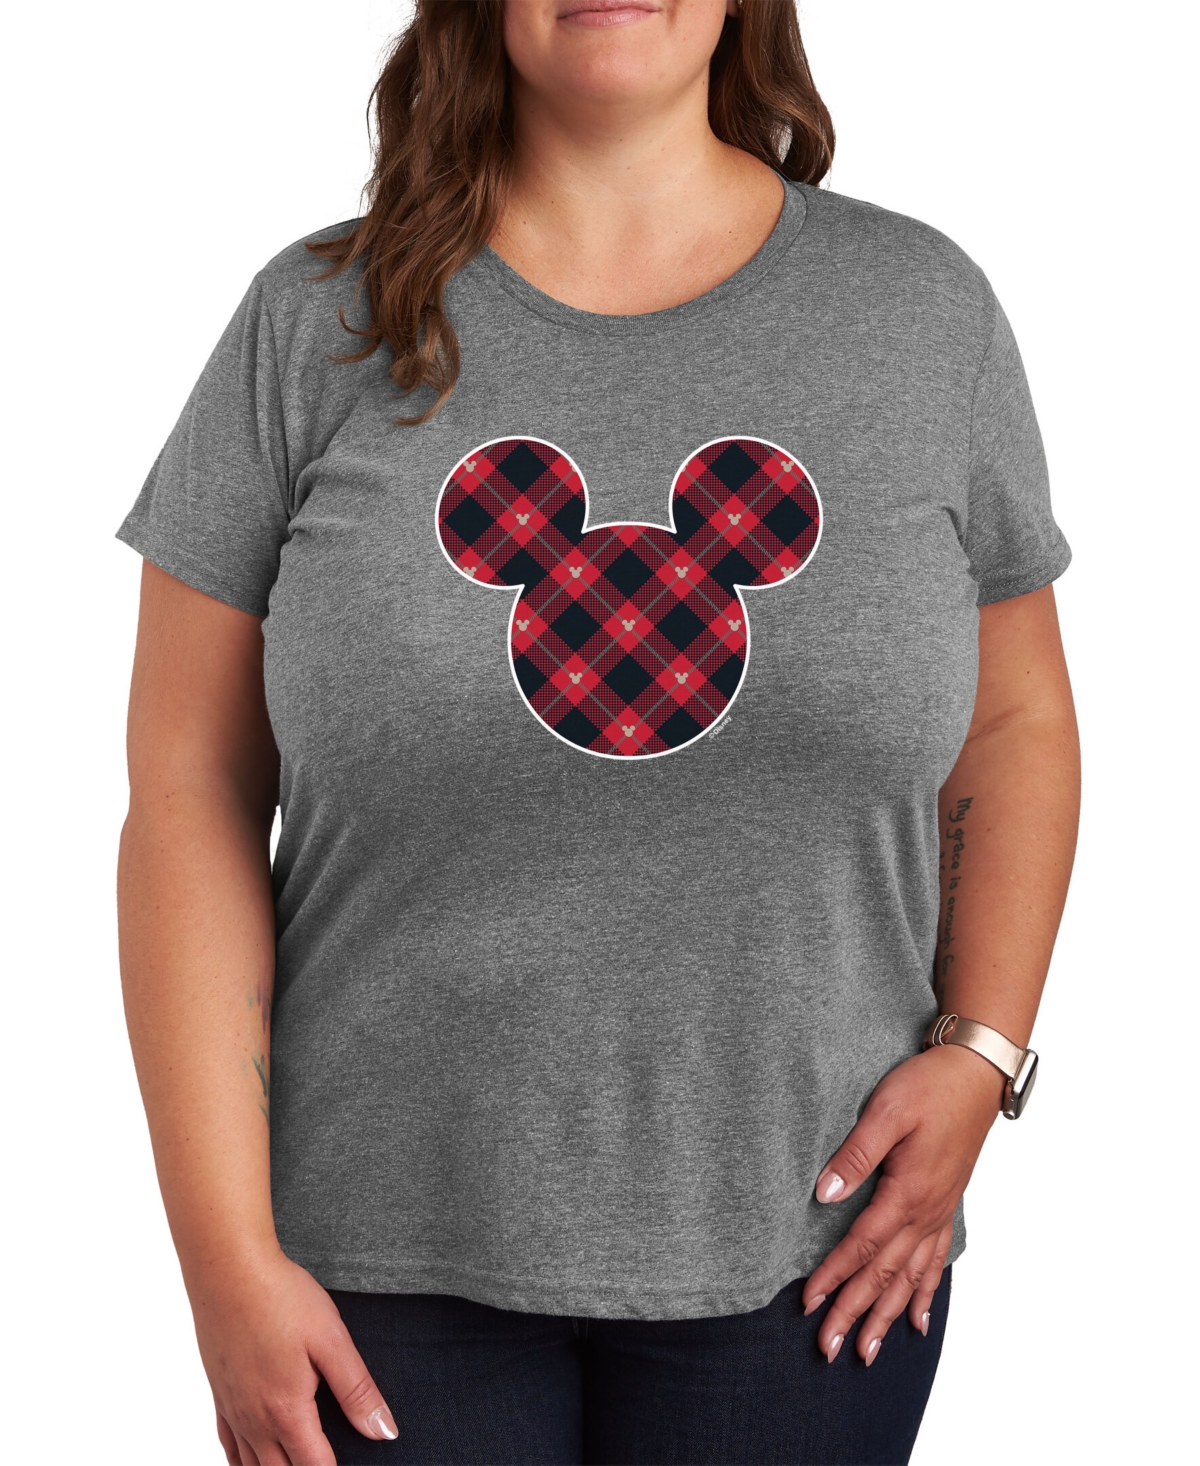 Air Waves Trendy Plus Size Disney Holiday Graphic T-shirt In Gray